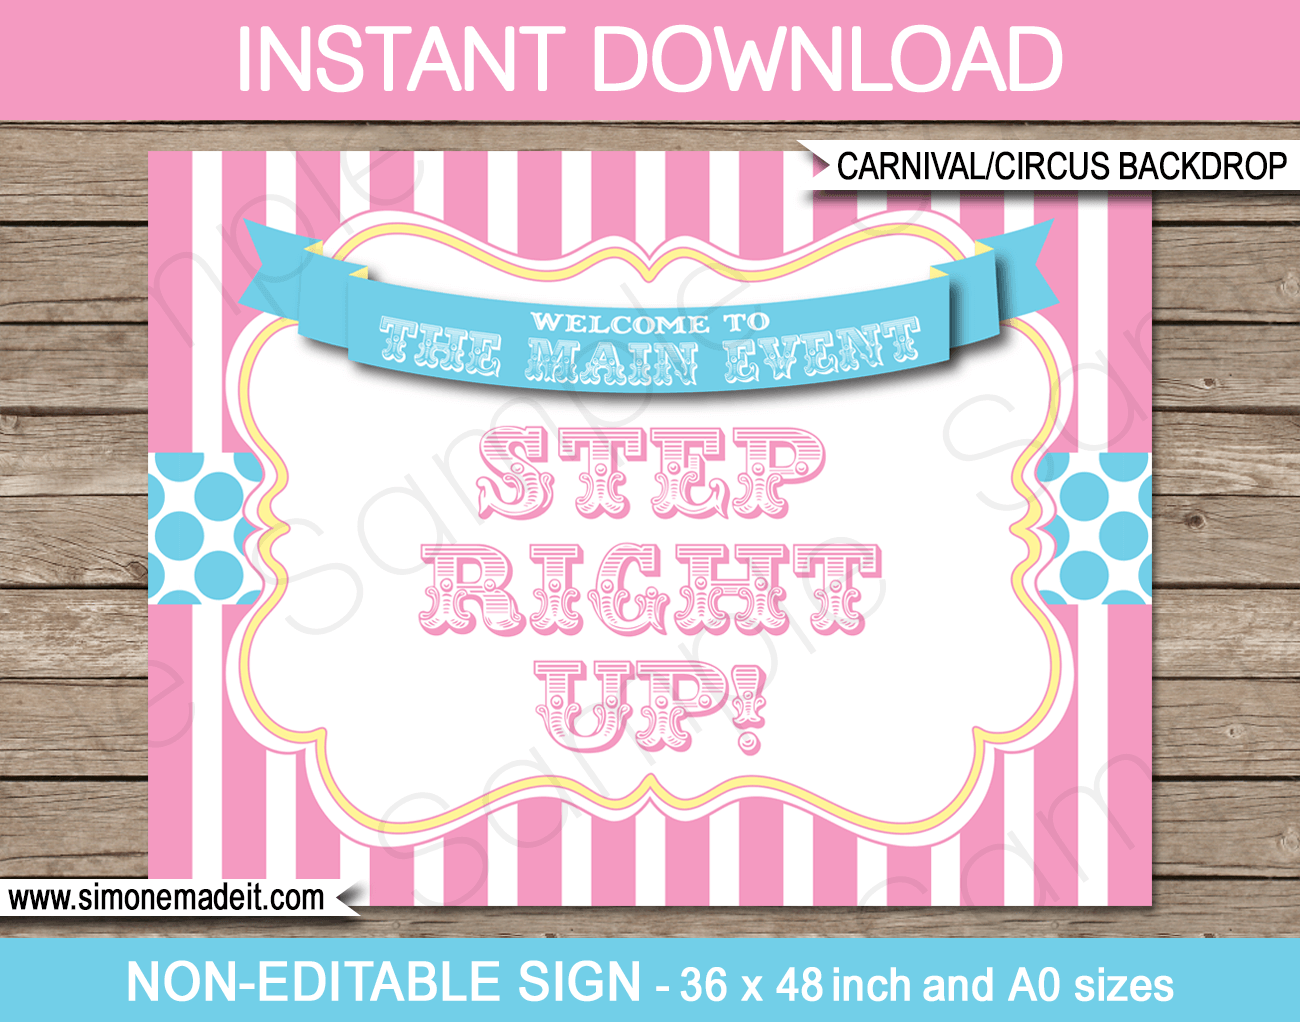 Pink & Aqua Printable Carnival Birthday Party Backdrop | Step Right Up | Circus Party | Decorations | DIY Template | INSTANT DOWNLOAD via simonemadeit.com